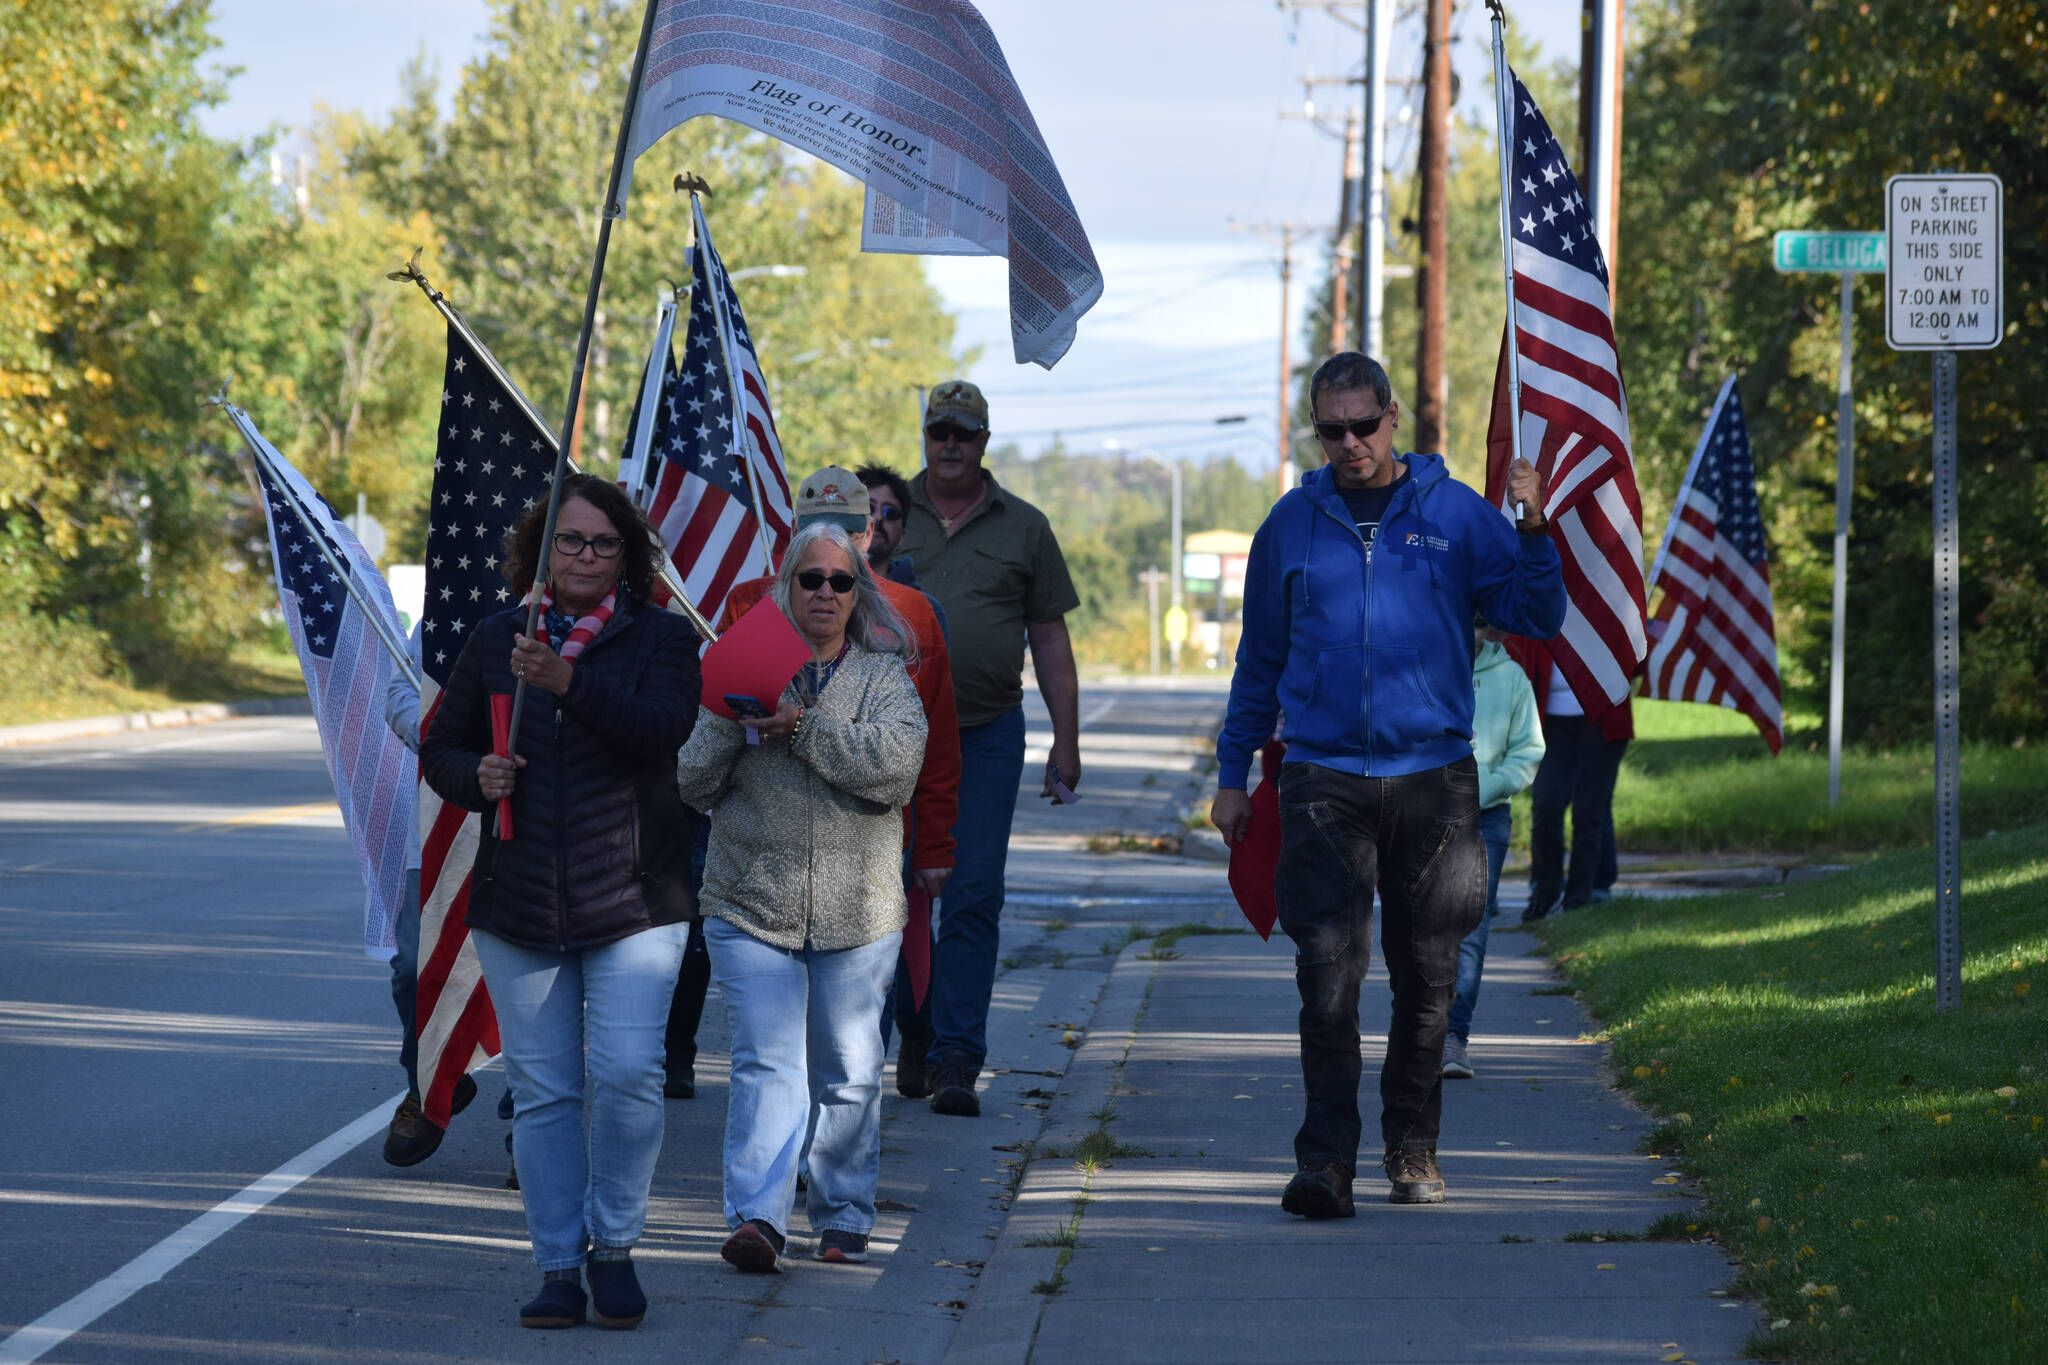 Community members march to Farnsworth Park in Soldotna during the 20th memorial service of the 9/11 terrorist attacks on Saturday, Sept. 11, 2021. (Camille Botello/Peninsula Clarion)